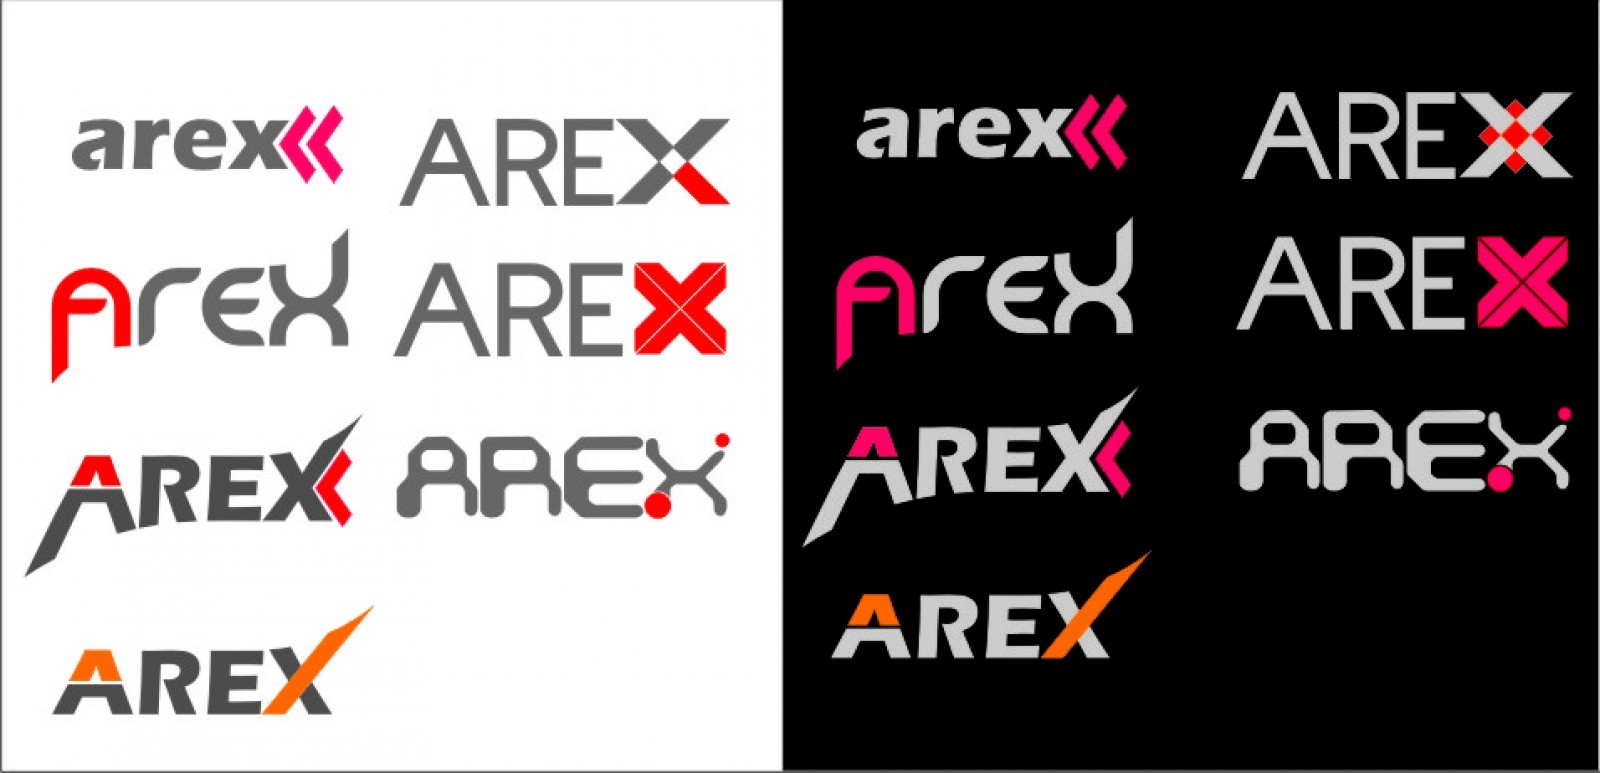 arex